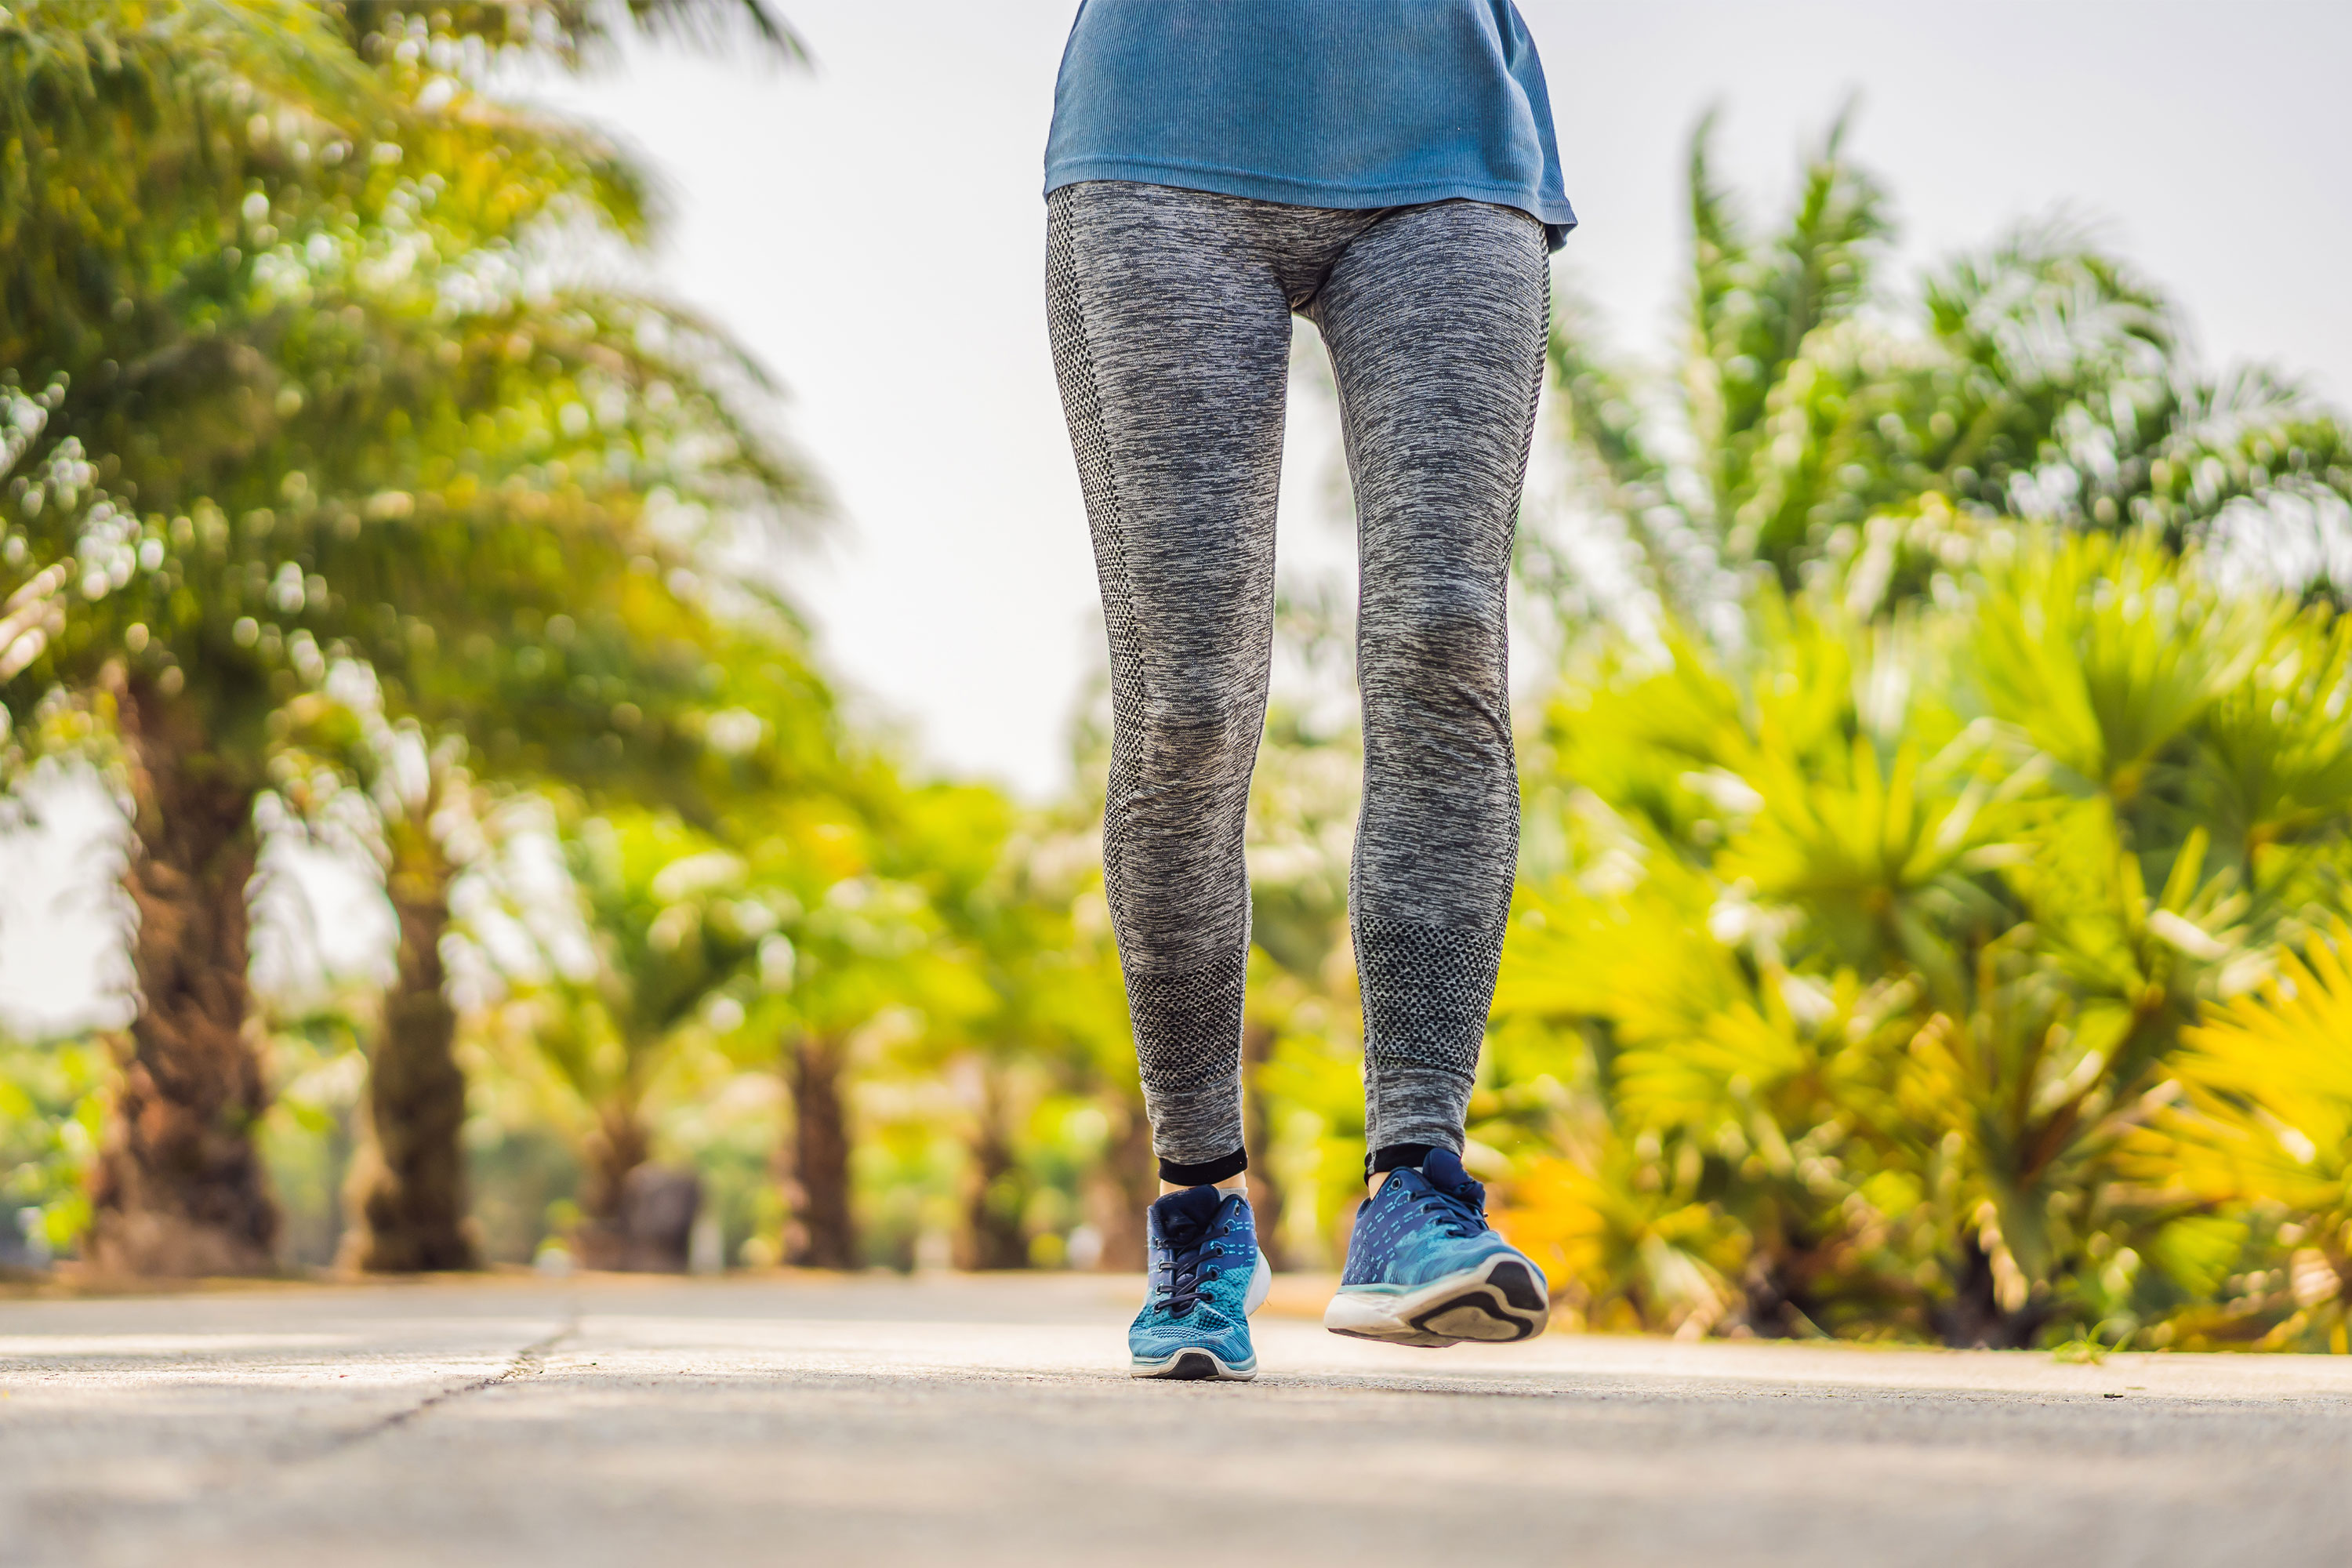 Groin Pain when Walking: Causes, Treatment, and Prevention